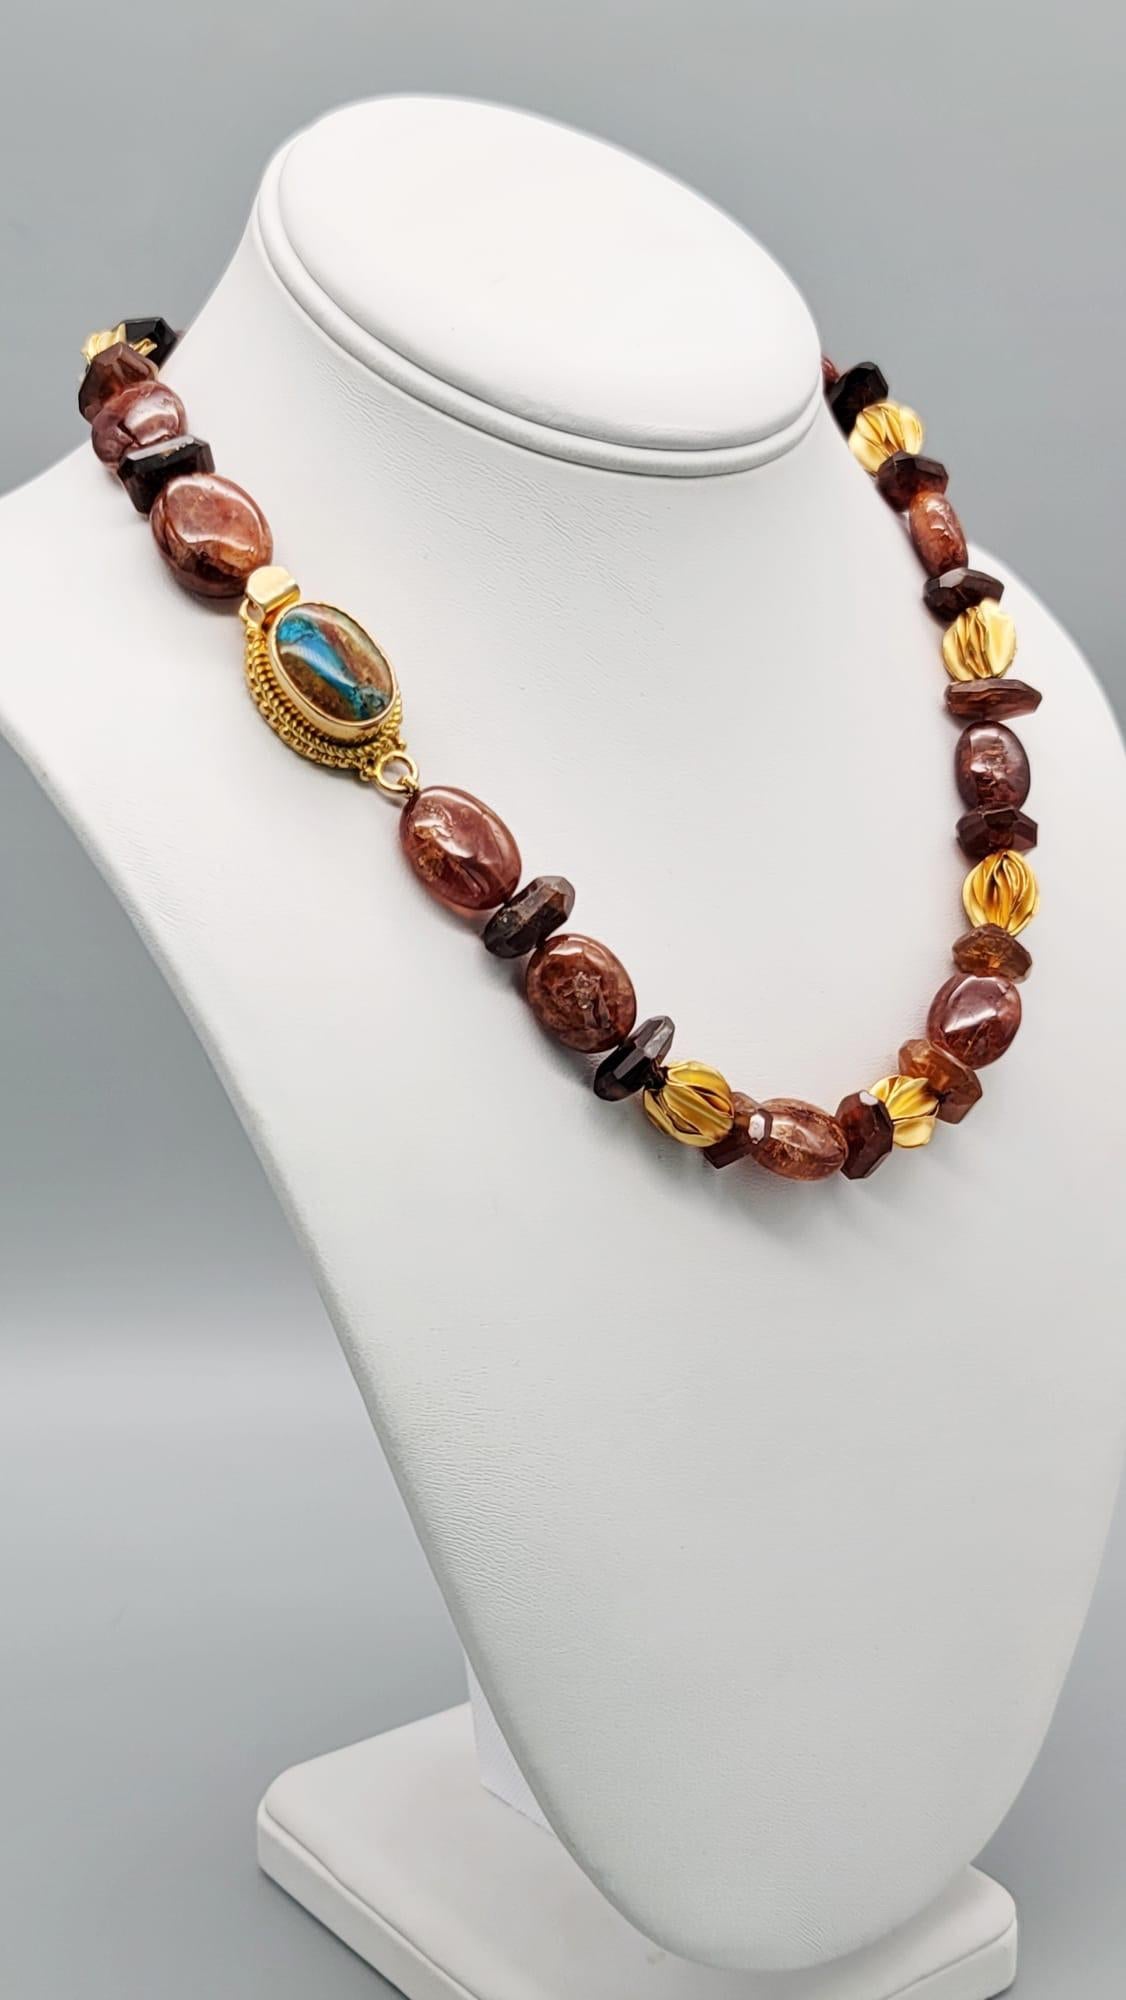 Mixed Cut A.Jeschel Hessonite Garnet set in a classic single strand necklace. For Sale